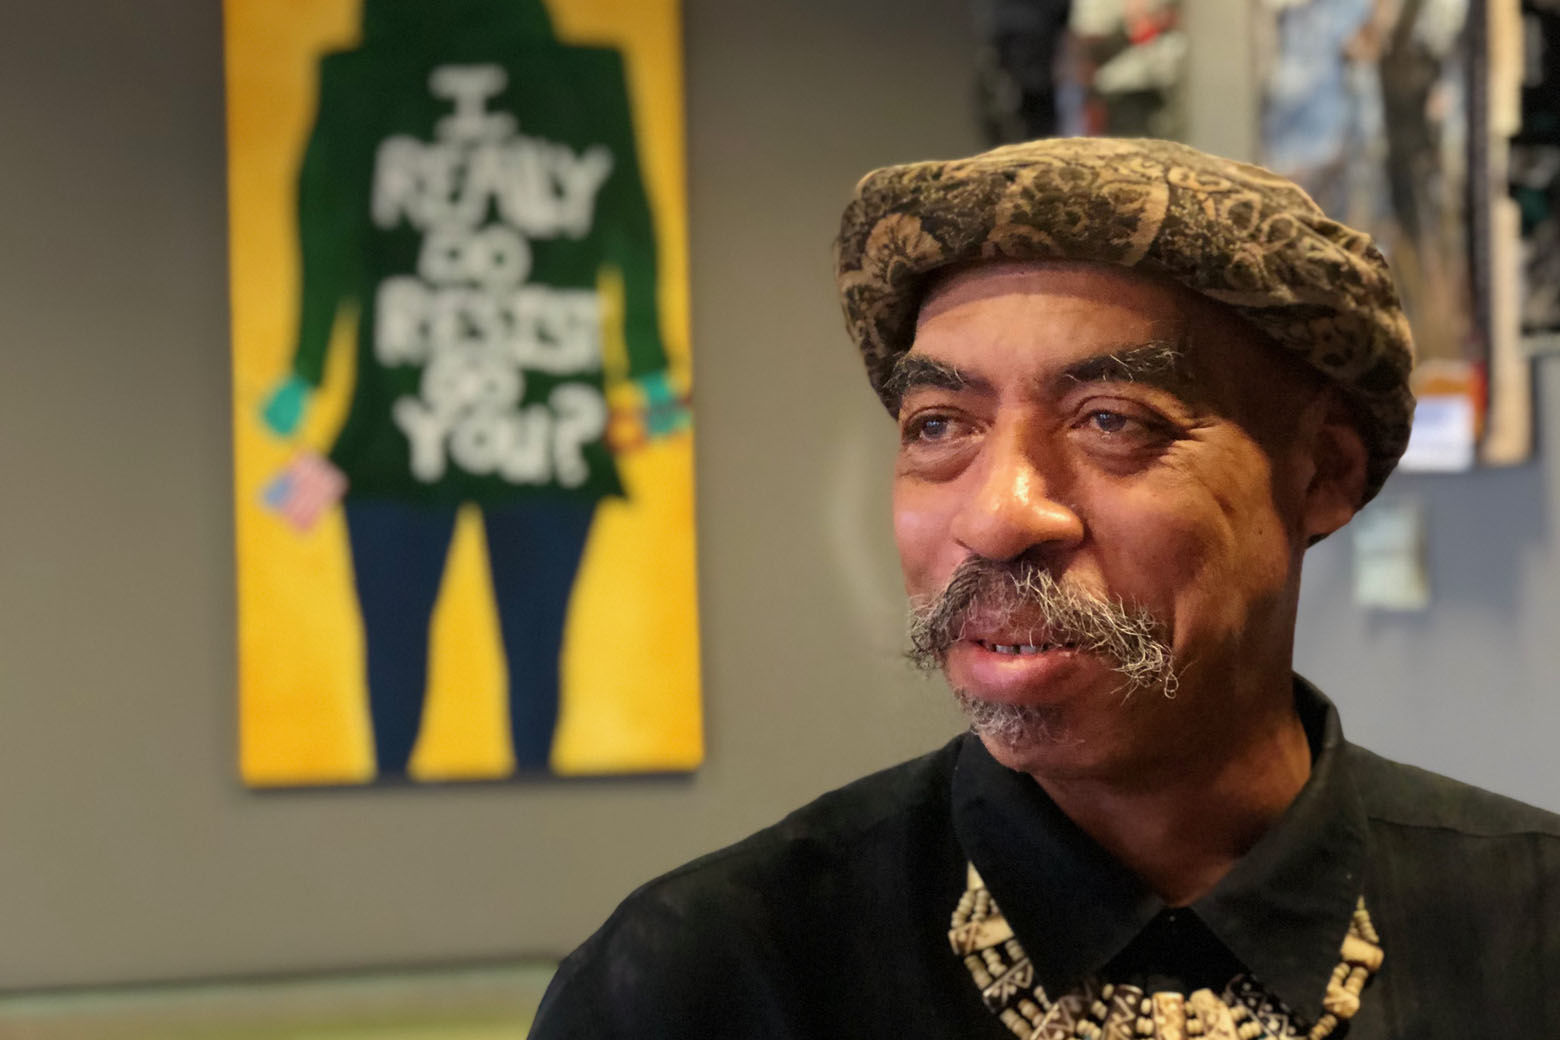 Darryl Burrell at Busboys and Poets in Takoma Park is a registered Democrat who said he votes in every election. He said he thinks Maryland Gov. Larry Hogan is more moderate than most Republicans but Democratic challenger Ben Jealous is getting his vote. (WTOP/Kate Ryan)